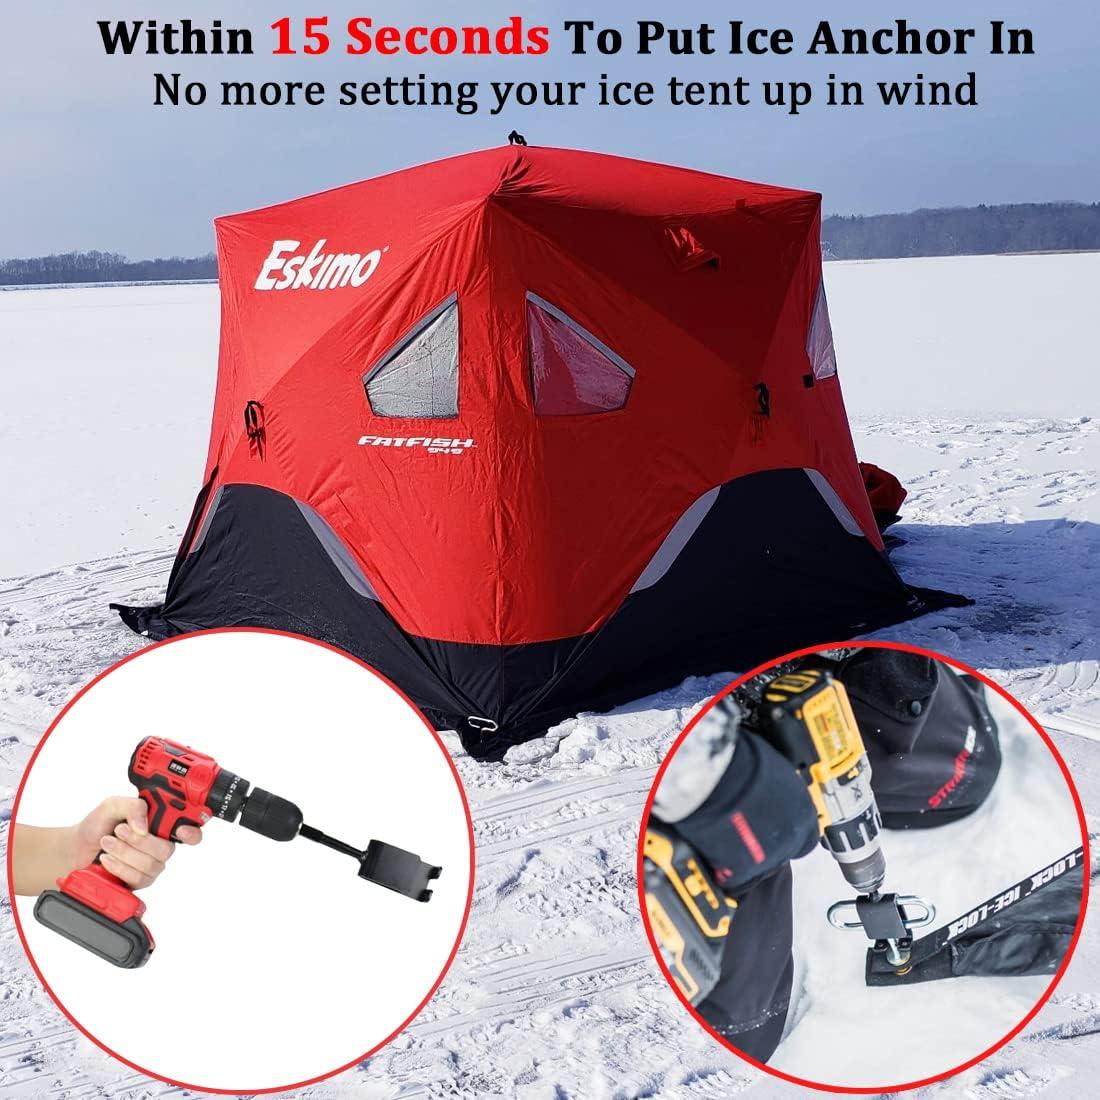 Huntury Universal Ice Anchor Power Drill Adapter for Ice Fishing, Make Set  Up Shelters Quick and Easy, Ice Shelter Accessories